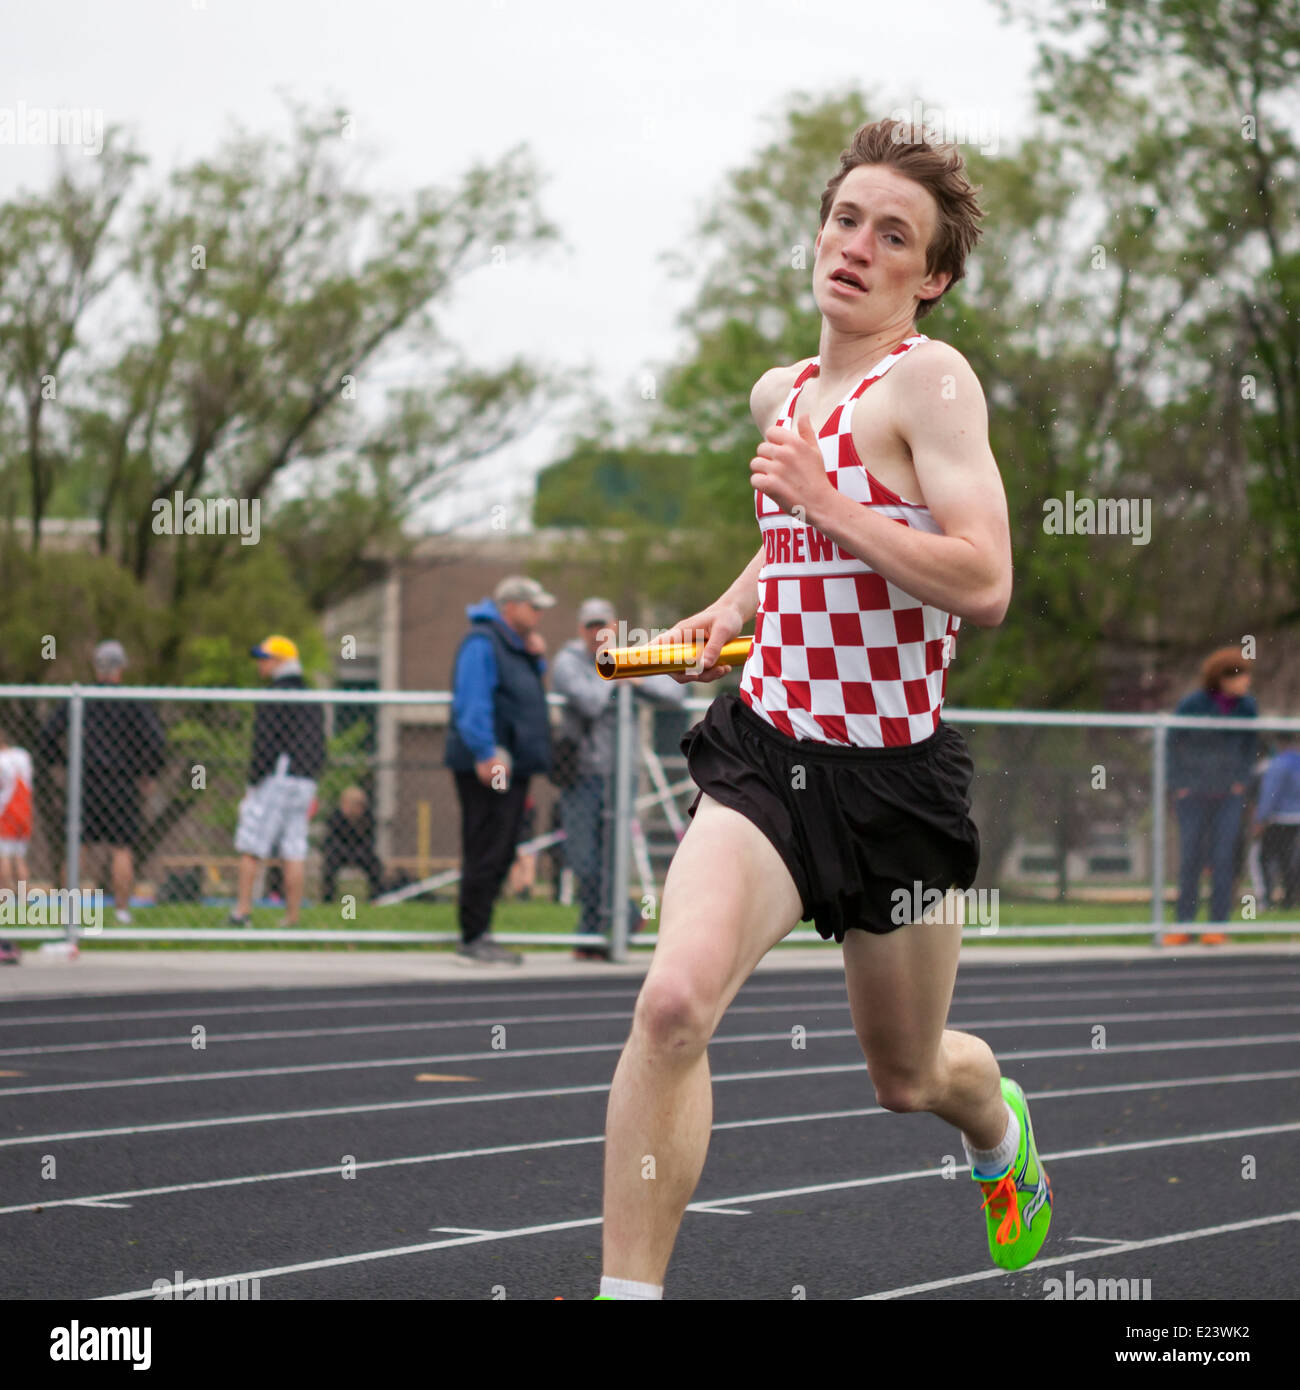 High school athletes compete in a track and filed meet in Milwaukee, Wisconsin, USA. Stock Photo